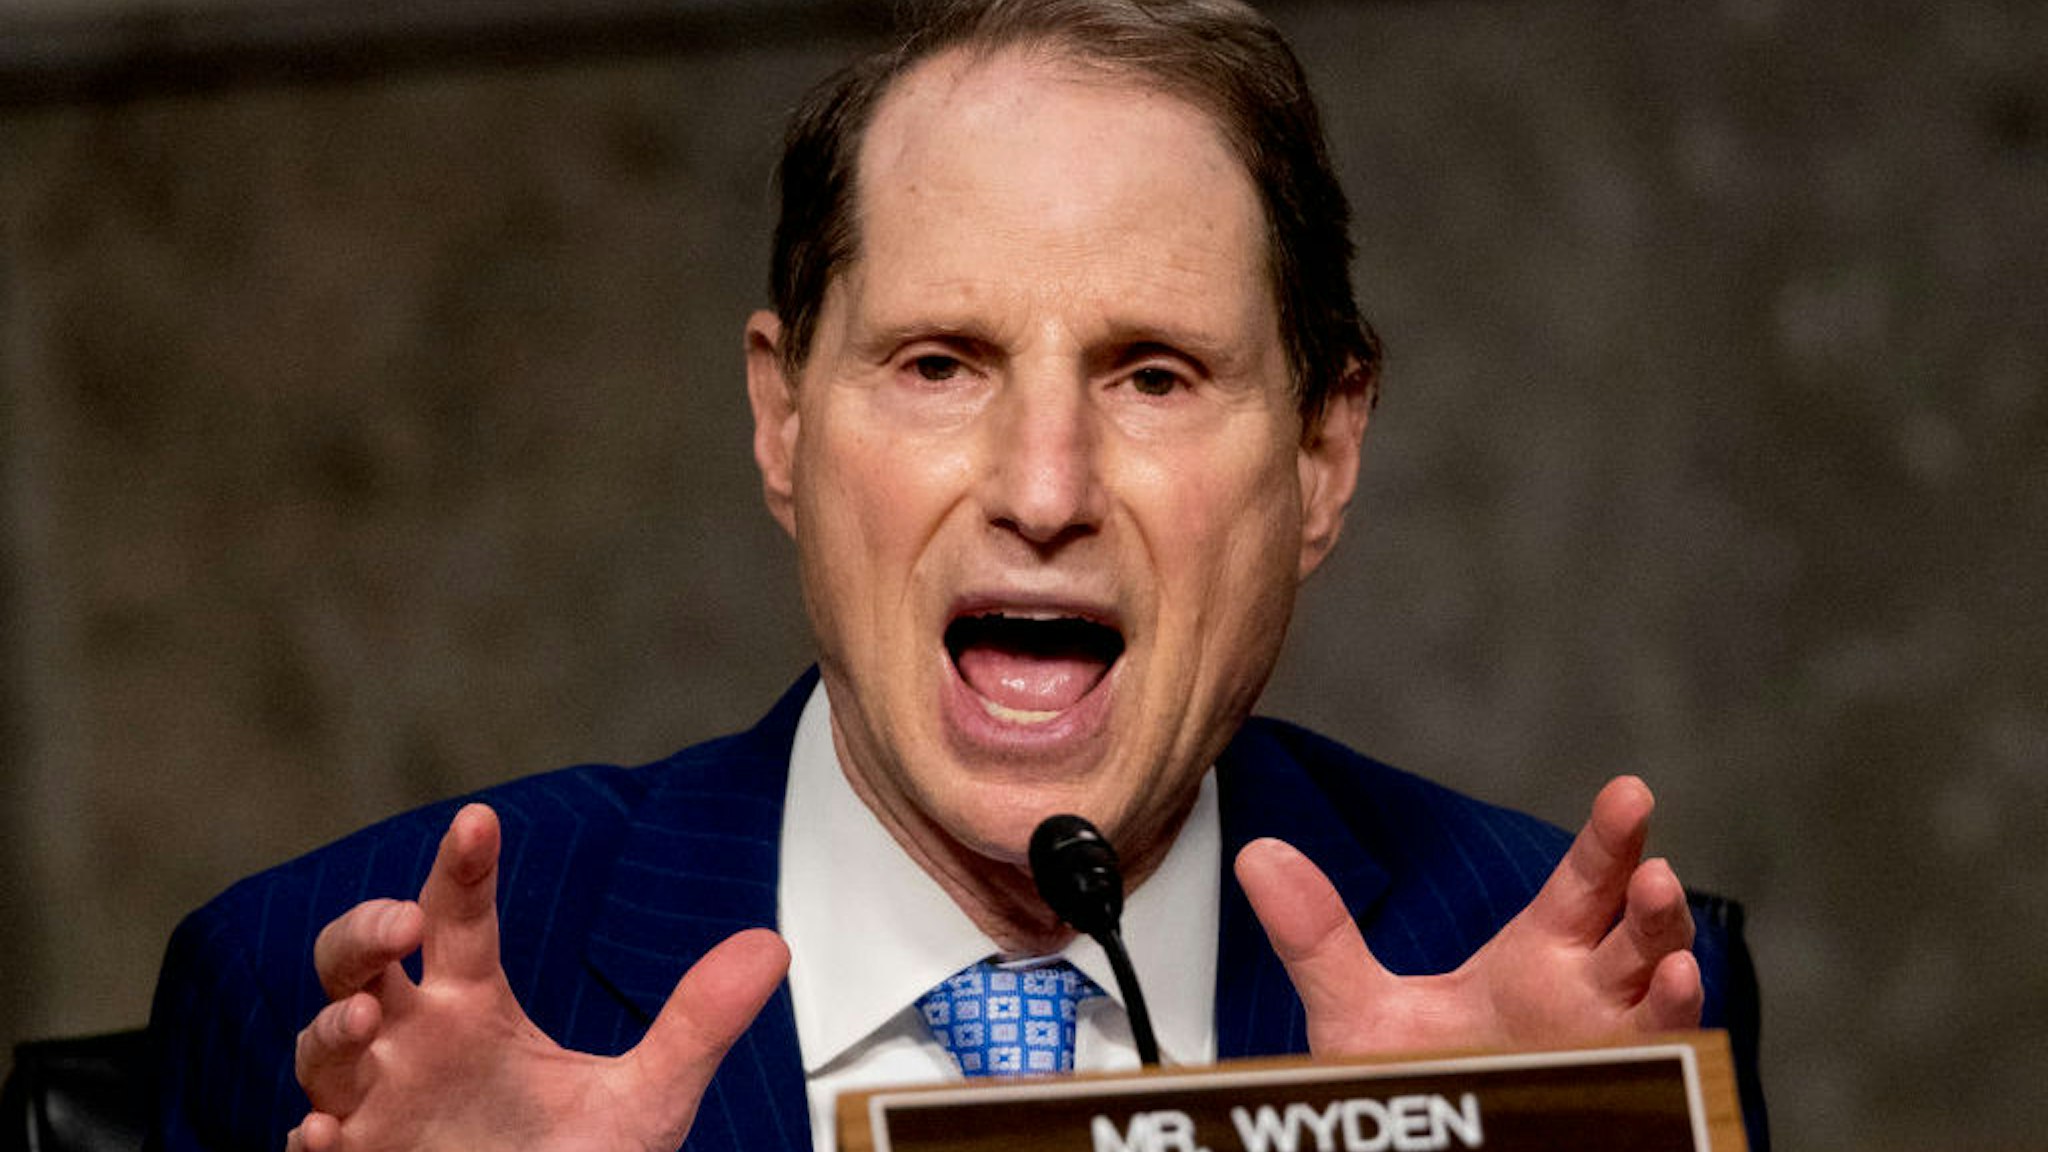 WASHINGTON, DC - JUNE 17: Ranking Member Sen. Ron Wyden, D-Ore., speaks as U.S. Trade Representative Robert Lighthizer appears at a Senate Finance Committee hearing on U.S. trade on Capitol Hill, on June 17, 2020, in Washington DC. (Photo by Andrew Harnik-Pool/Getty Images)